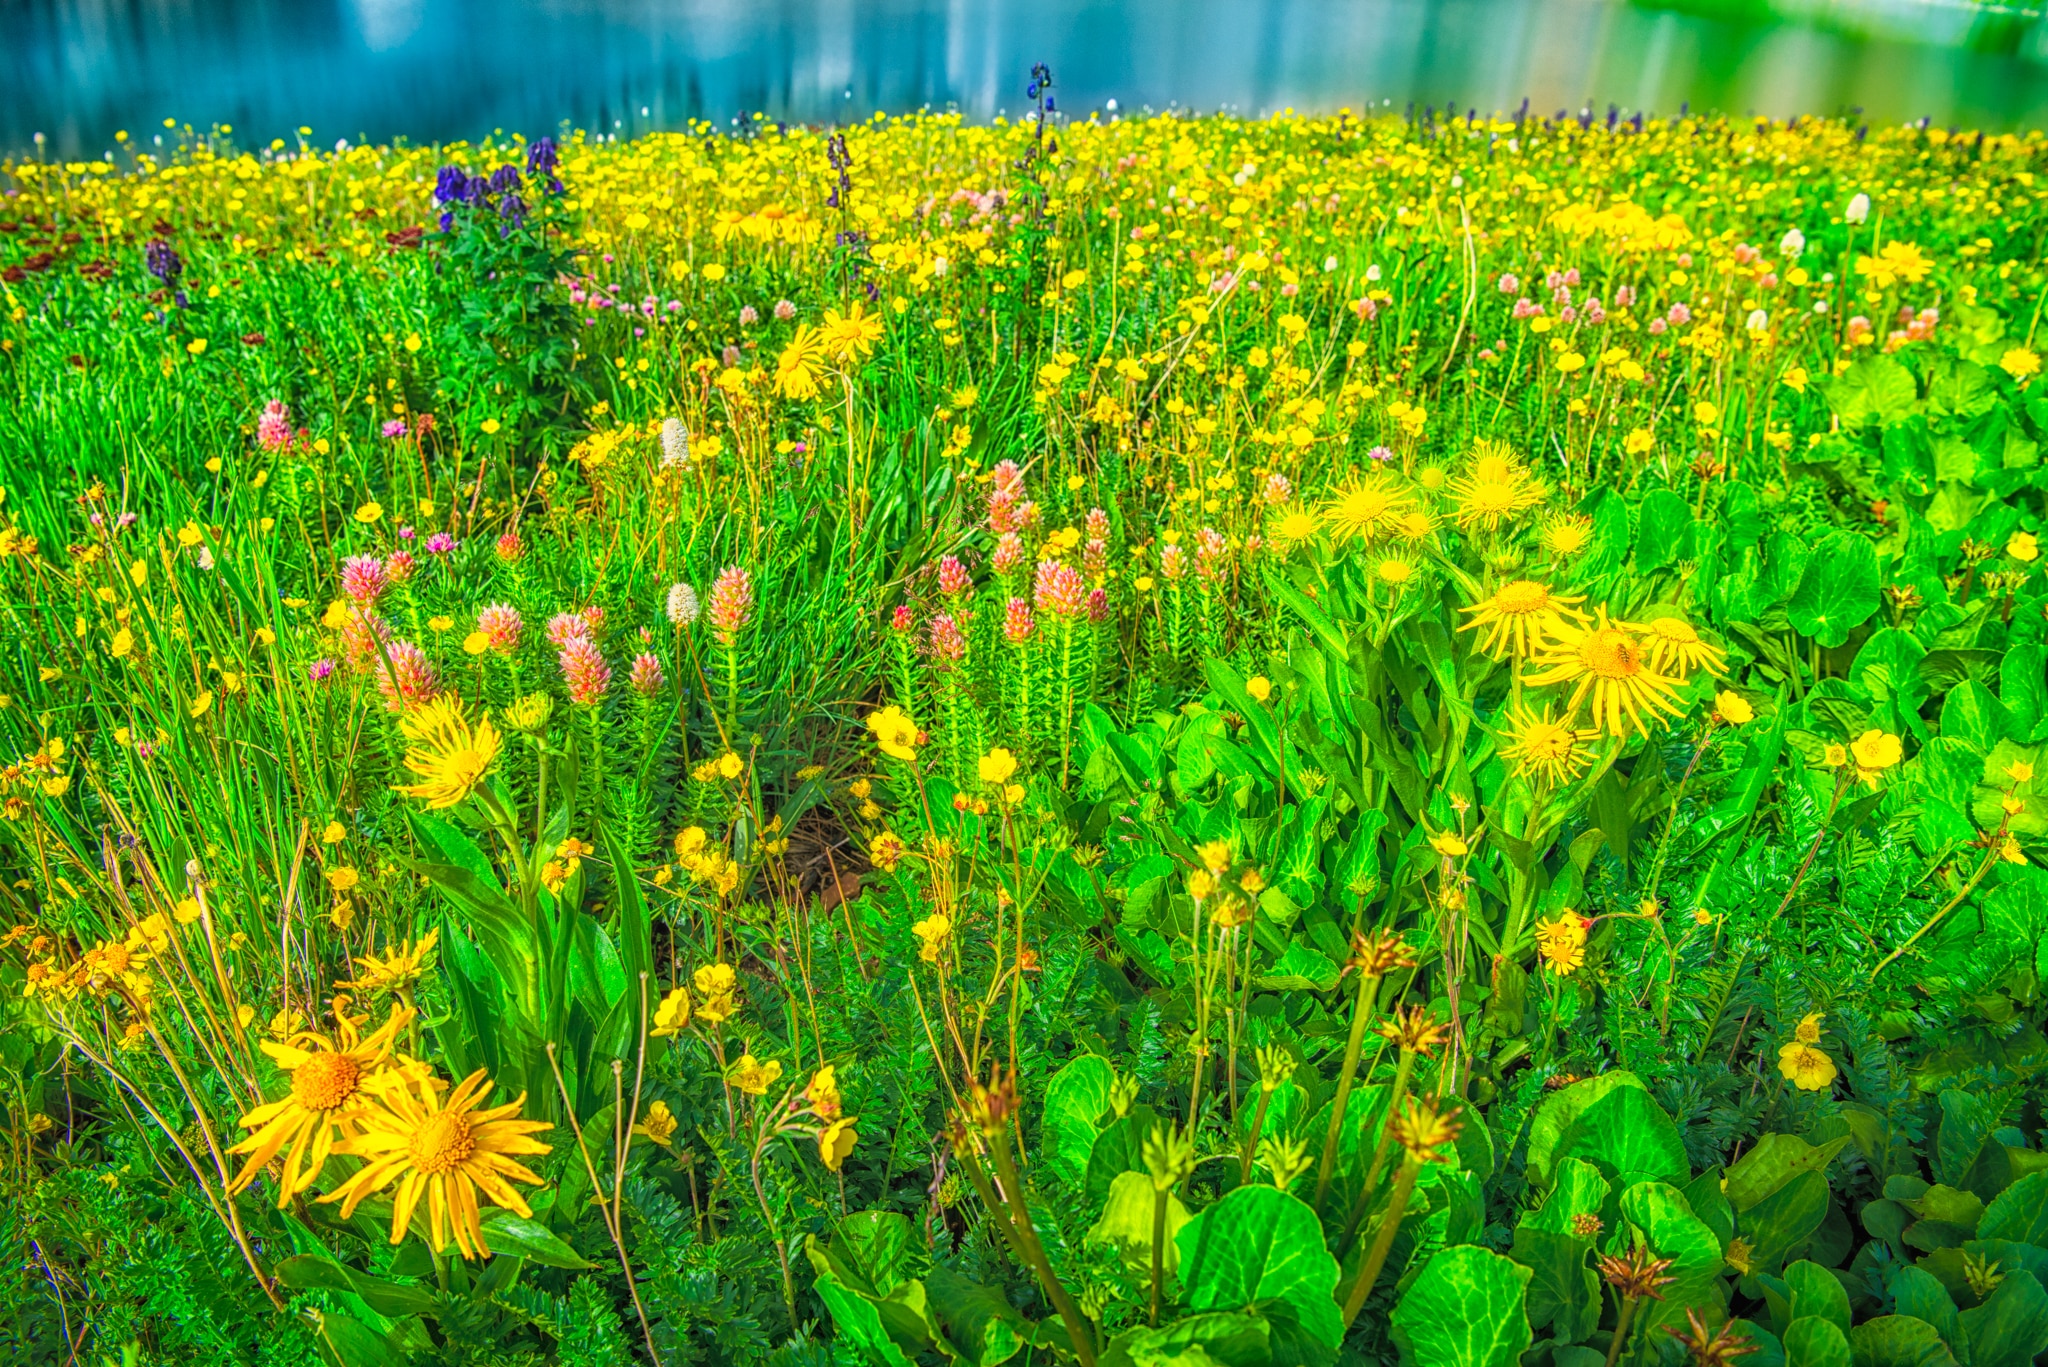 Leafy Arnica, Queens, Crown, Bistort, Monkshood, and Alpine Avens grow along the shore of Clear Lake, a hanging lake below Peak 13309 at the end of FS 815, located in the mountains between Ouray and Silverton, Colorado.